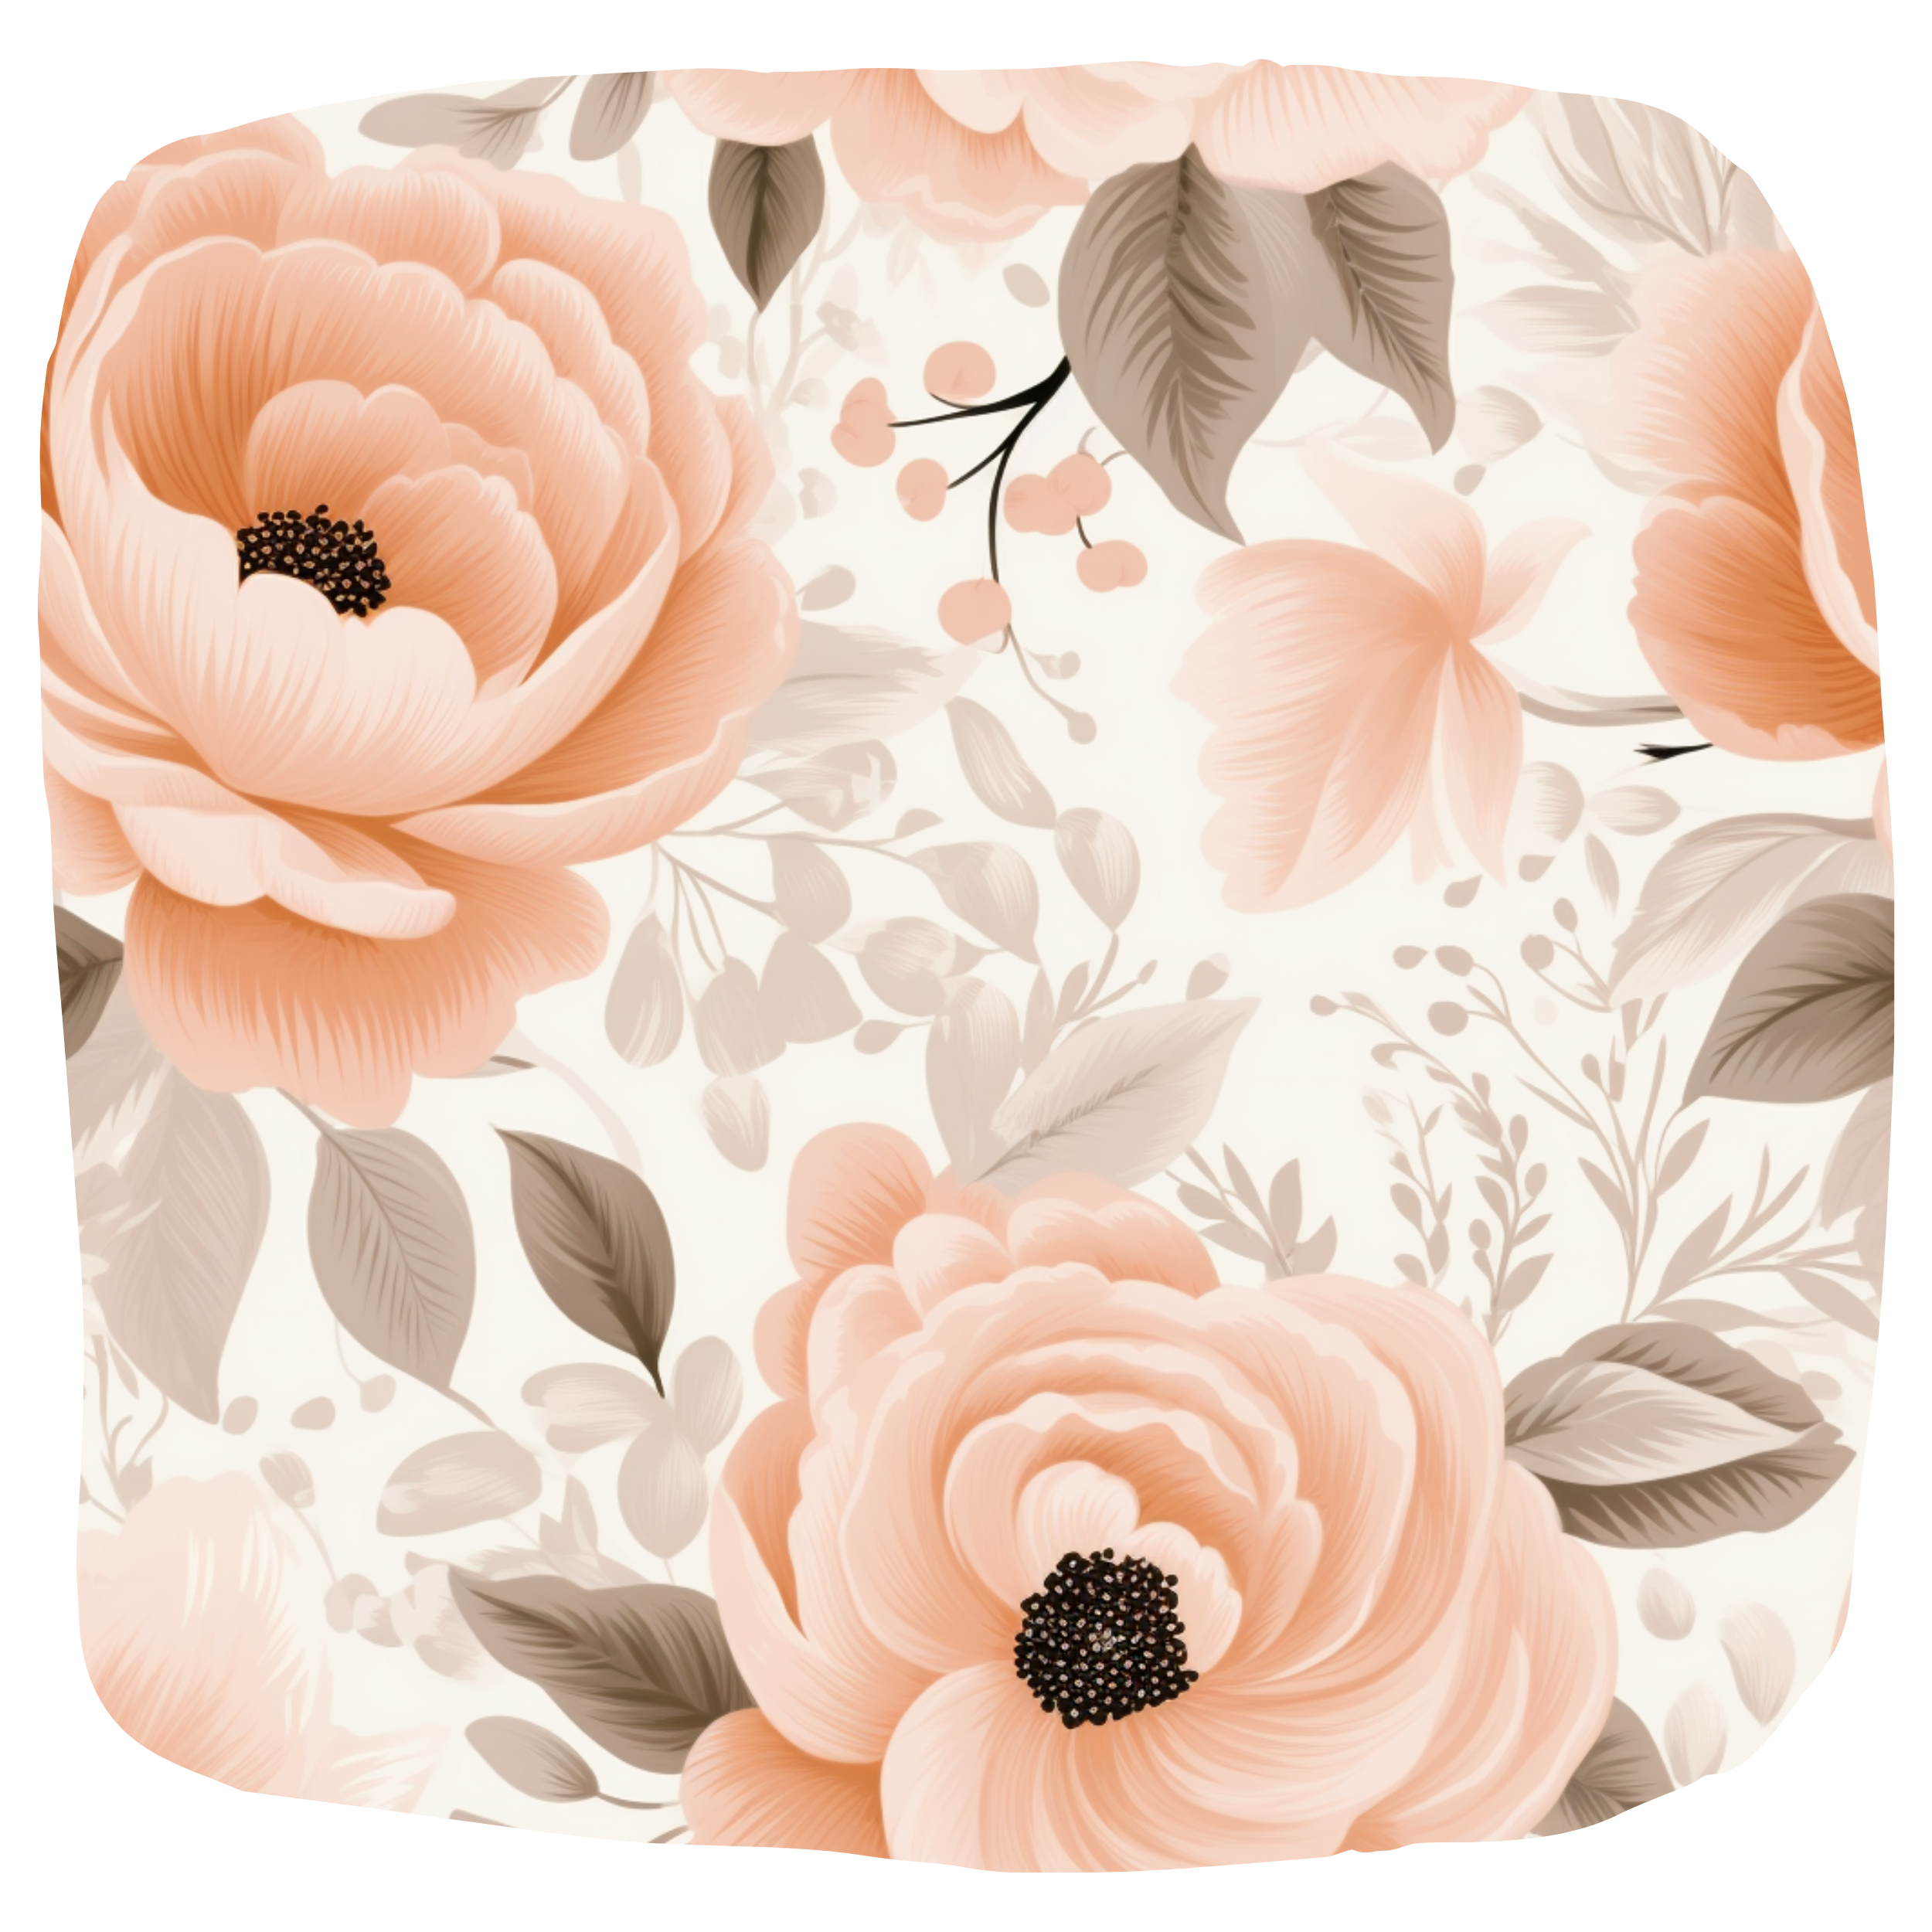 CRIB BEDDING I PERSONALIZED PEACH AND TAUPE FLORAL